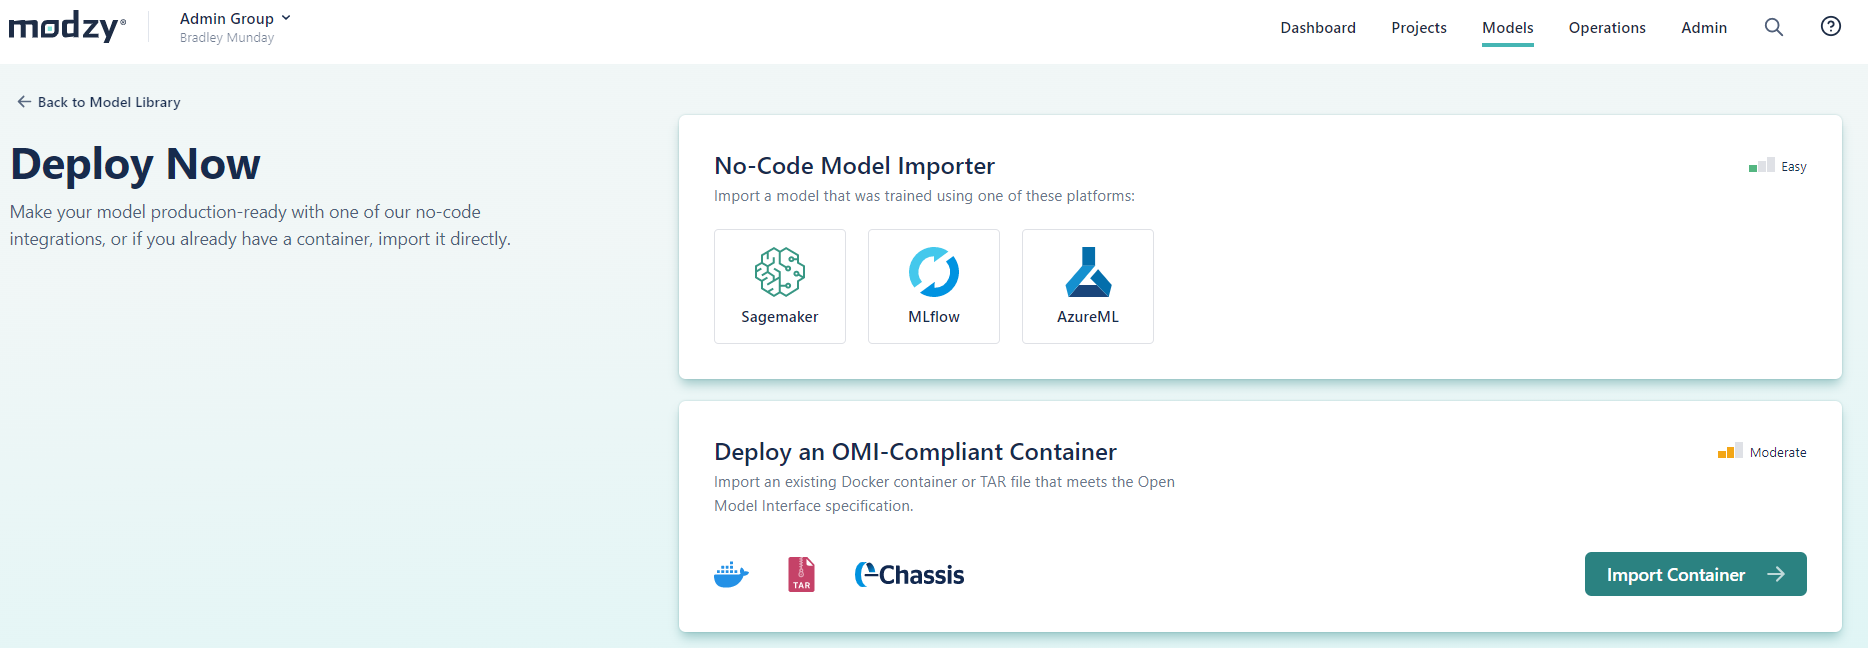 Model Deployment Home Page